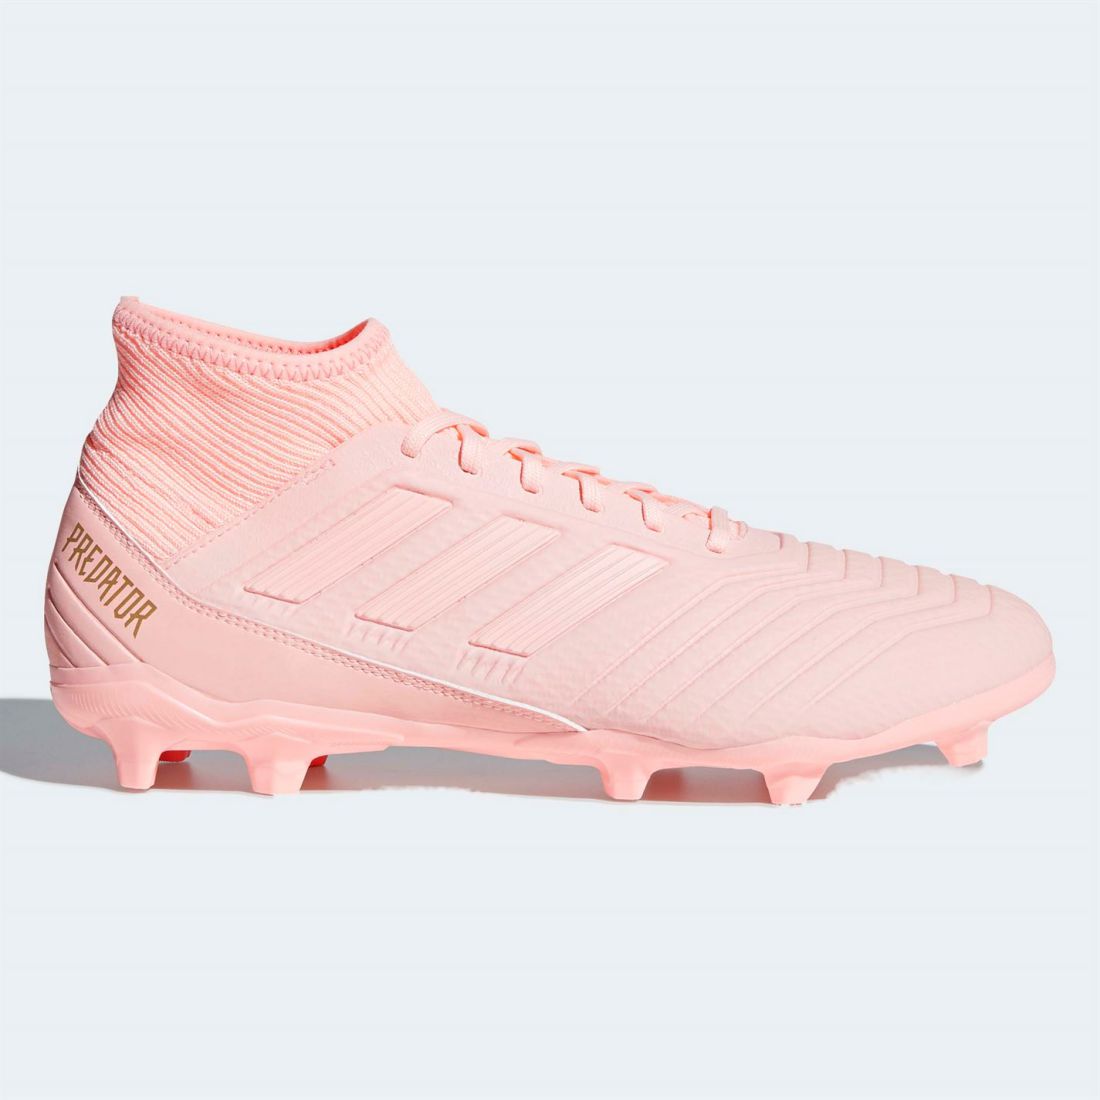 pink adidas football boots sports direct